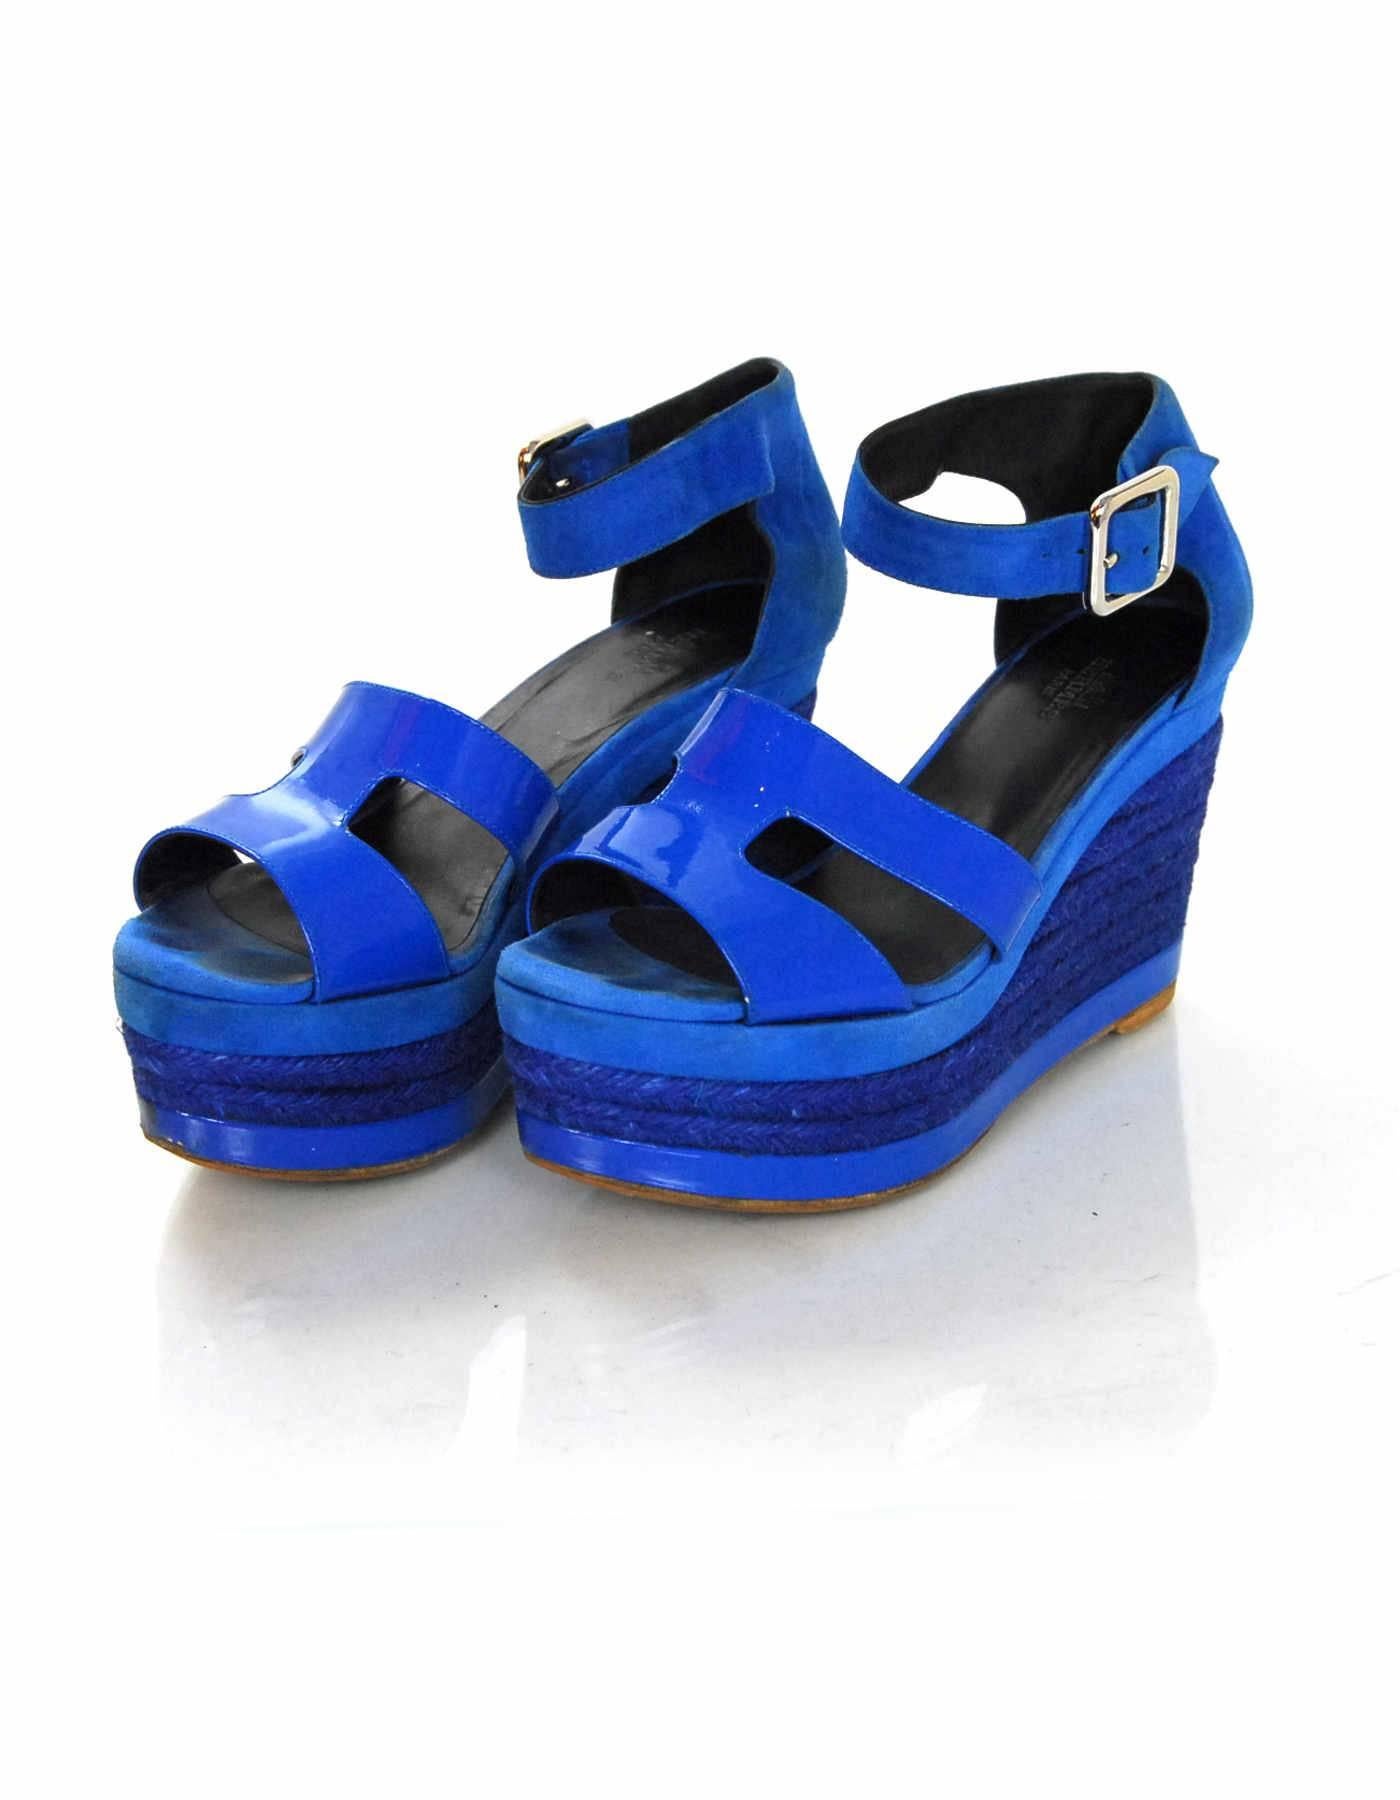 Hermes Blue Ilana Espadrille Sandals Sz 35

Made In: Spain
Color: Blue
Materials: Patent leather, suede, jute rope
Closure/Opening: Buckle closure at ankle
Sole Stamp: Hermes 35 Made in Spain
Retail Price: $920 + tax
Overall Condition: Good